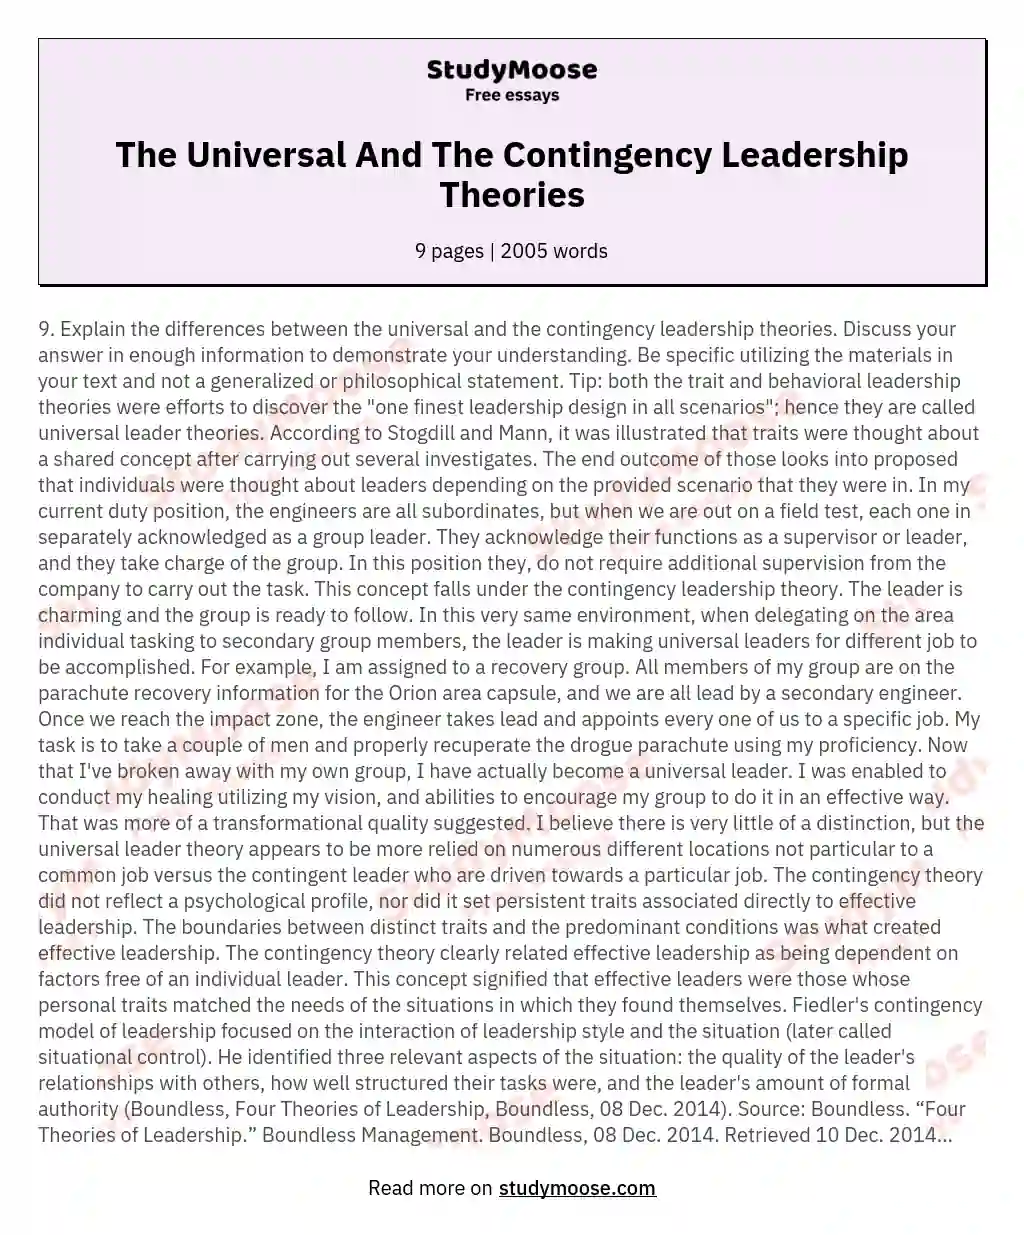 The Universal And The Contingency Leadership Theories essay